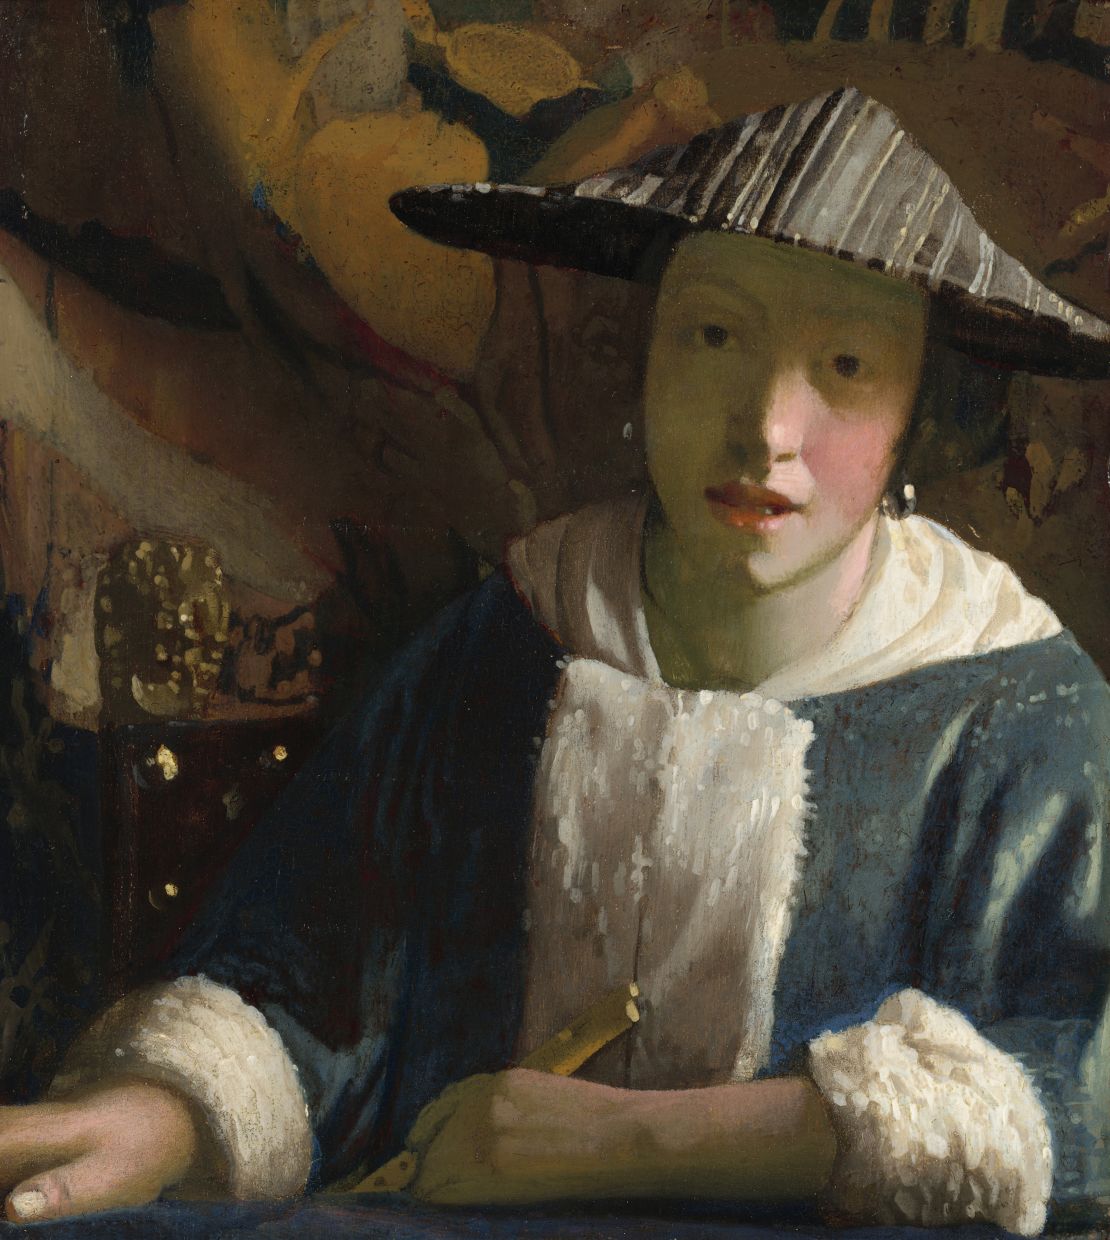 "Girl with the Flute" may have been painted by Vermeer's assistant or a family member.